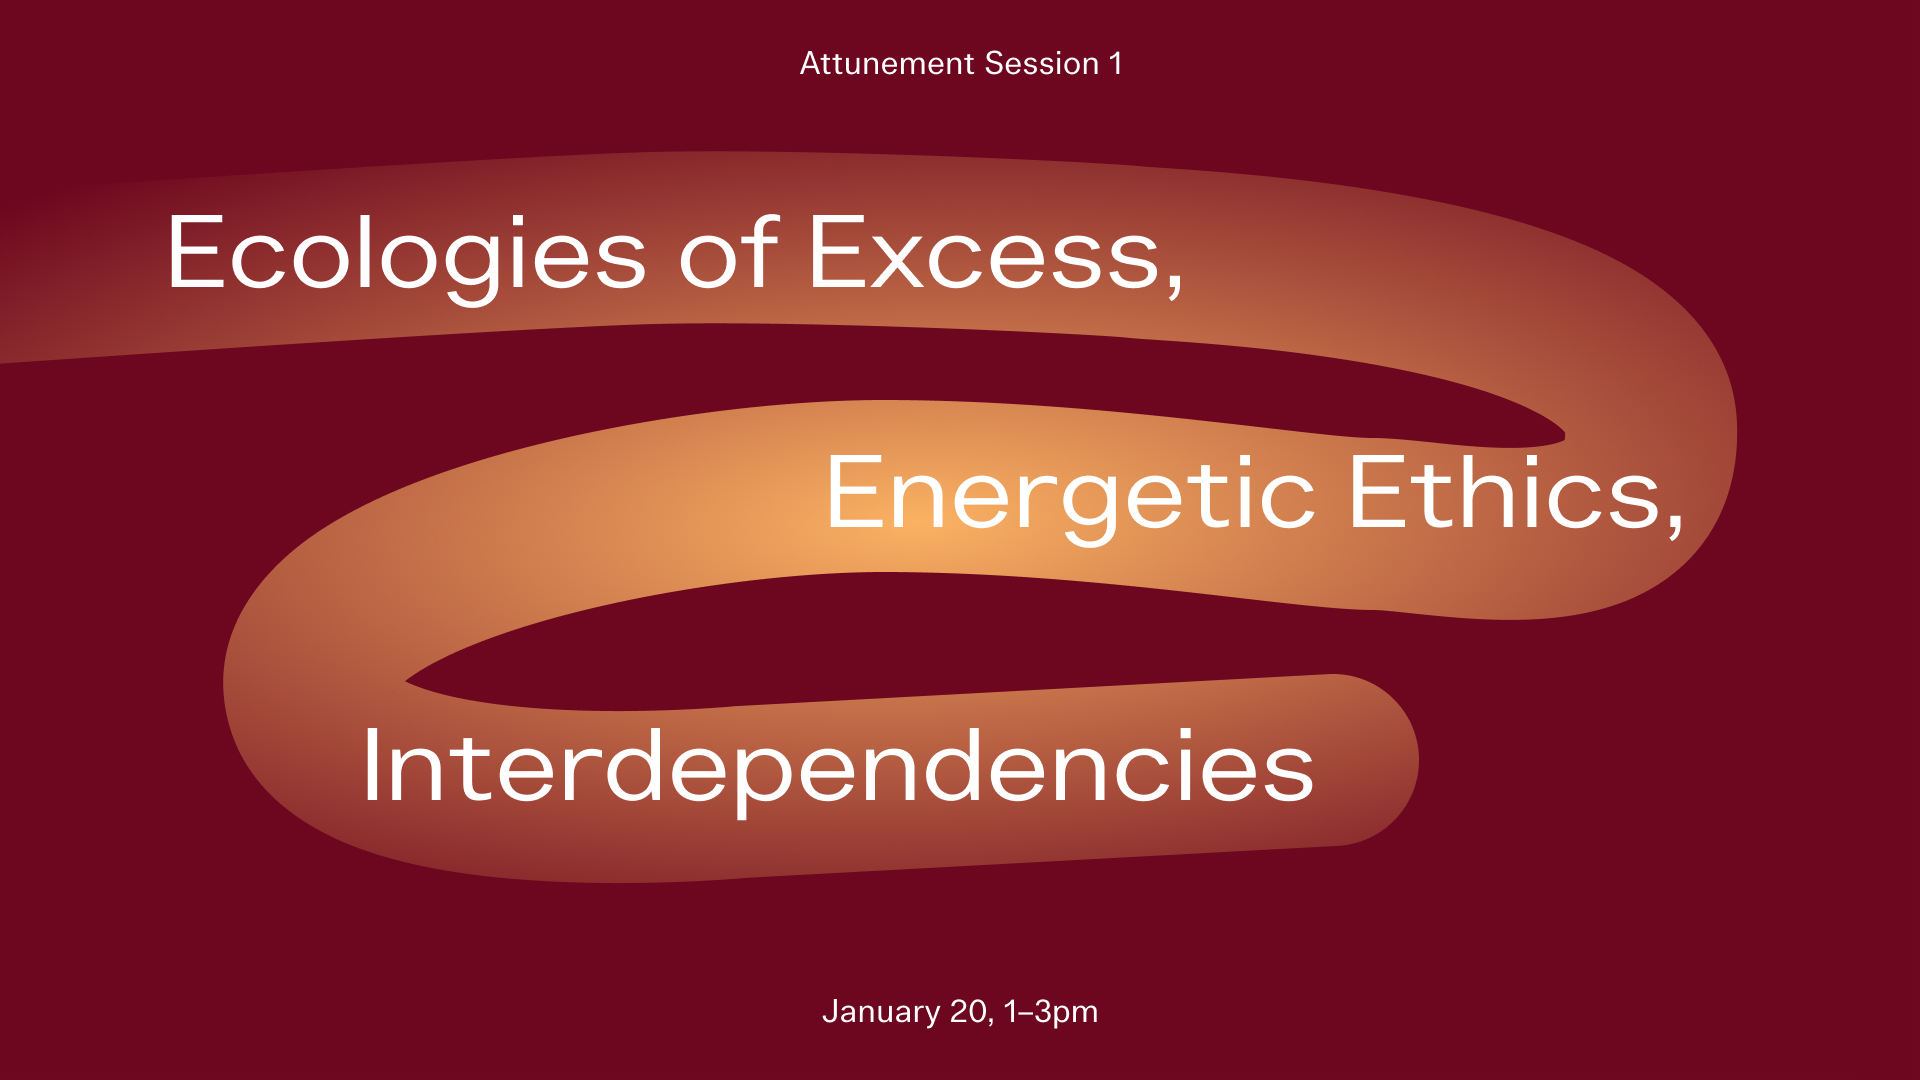 Text image with swirl: Attunement Session 1 Ecologies of Excess, Energetic Ethics, Interdependencies